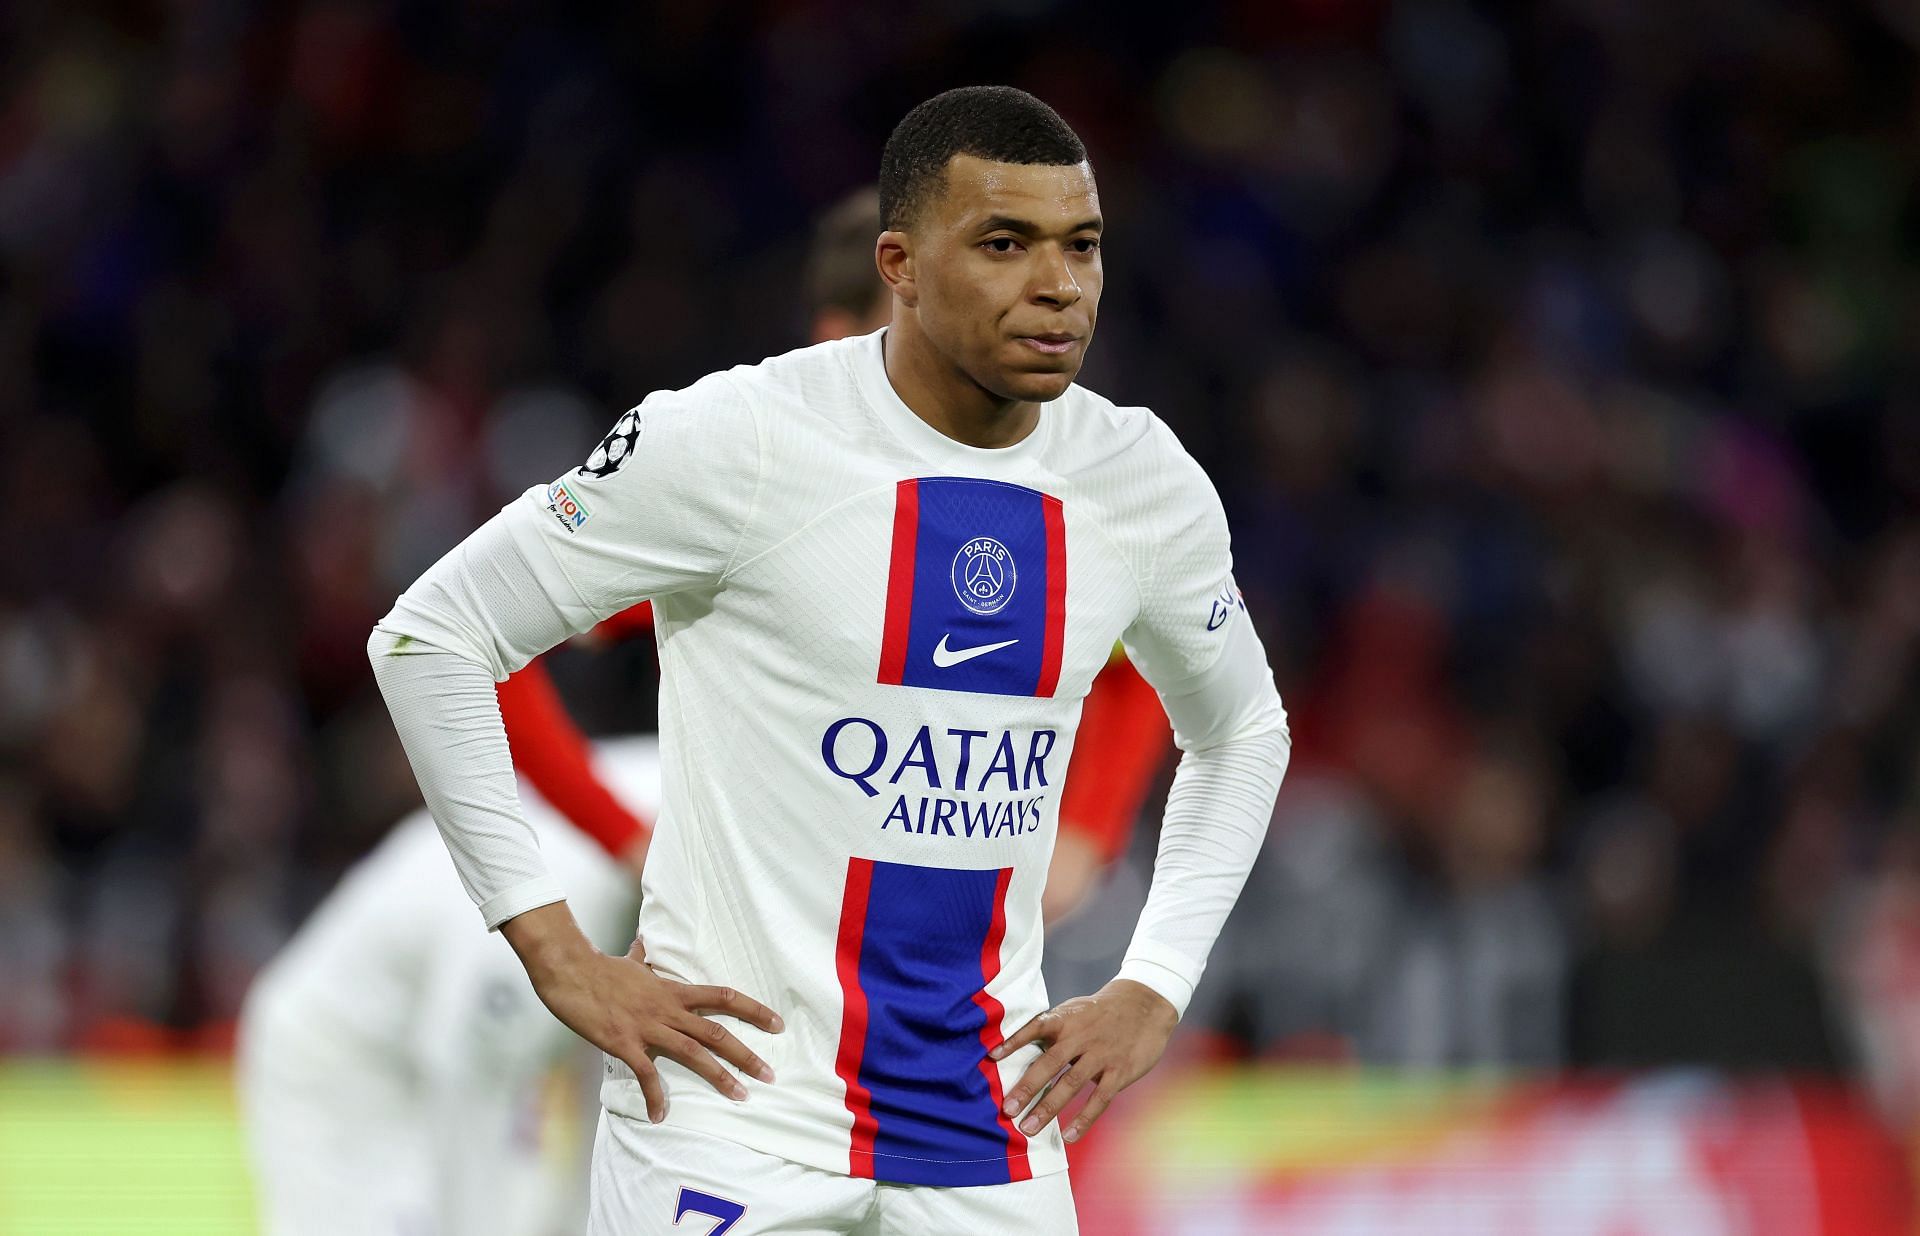 A report in Spain has disputed claims that Mbappe is set to join Real Madrid.